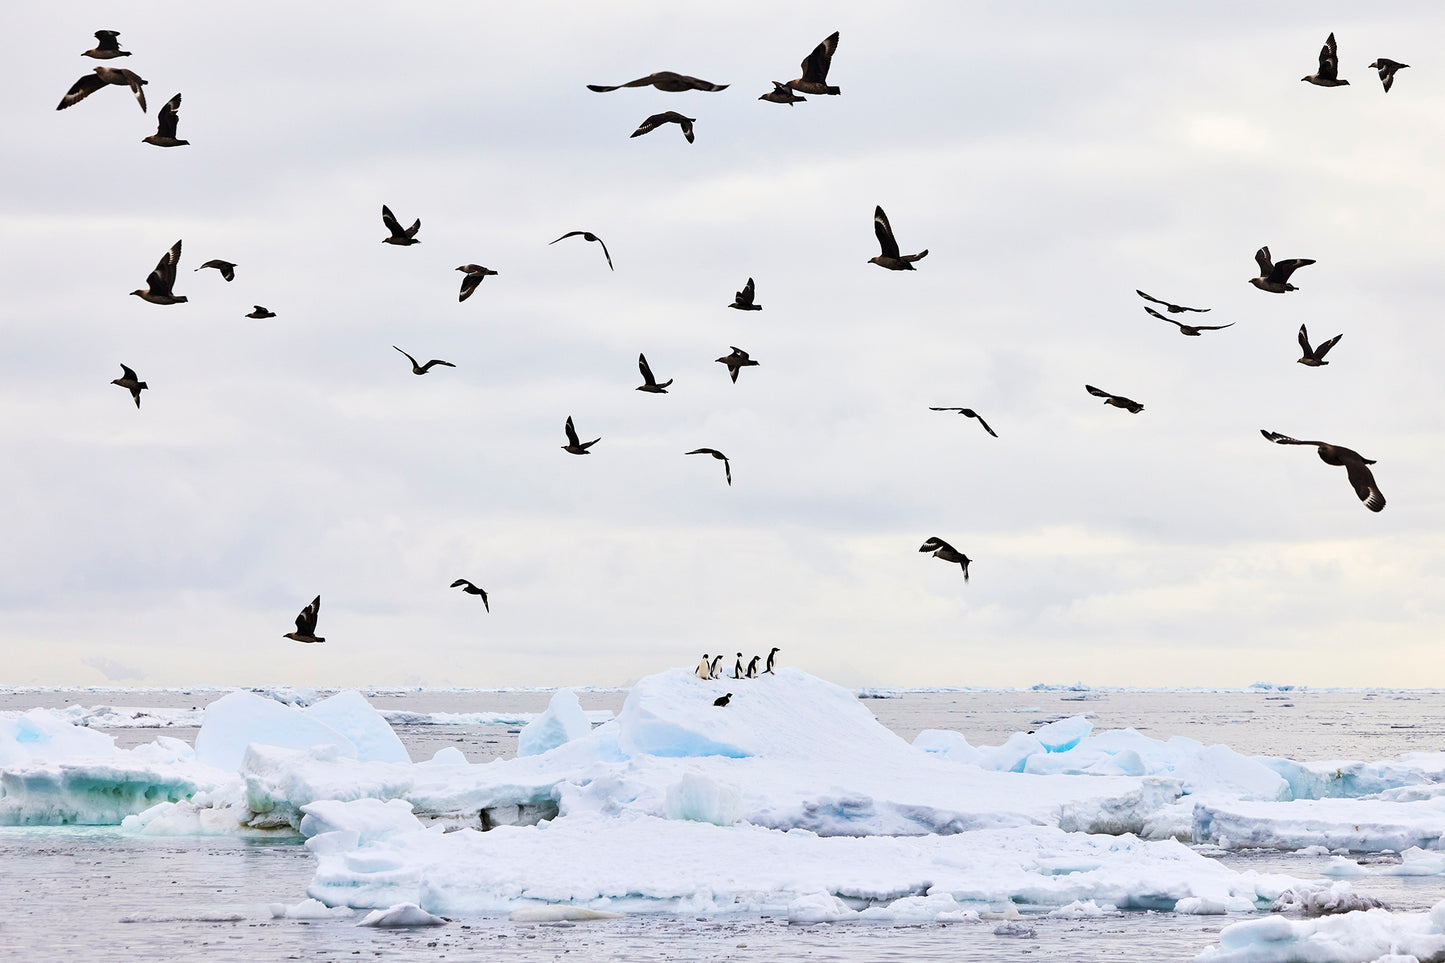 High hopes - Adelie Penguins at Ross Sea, Antarctica